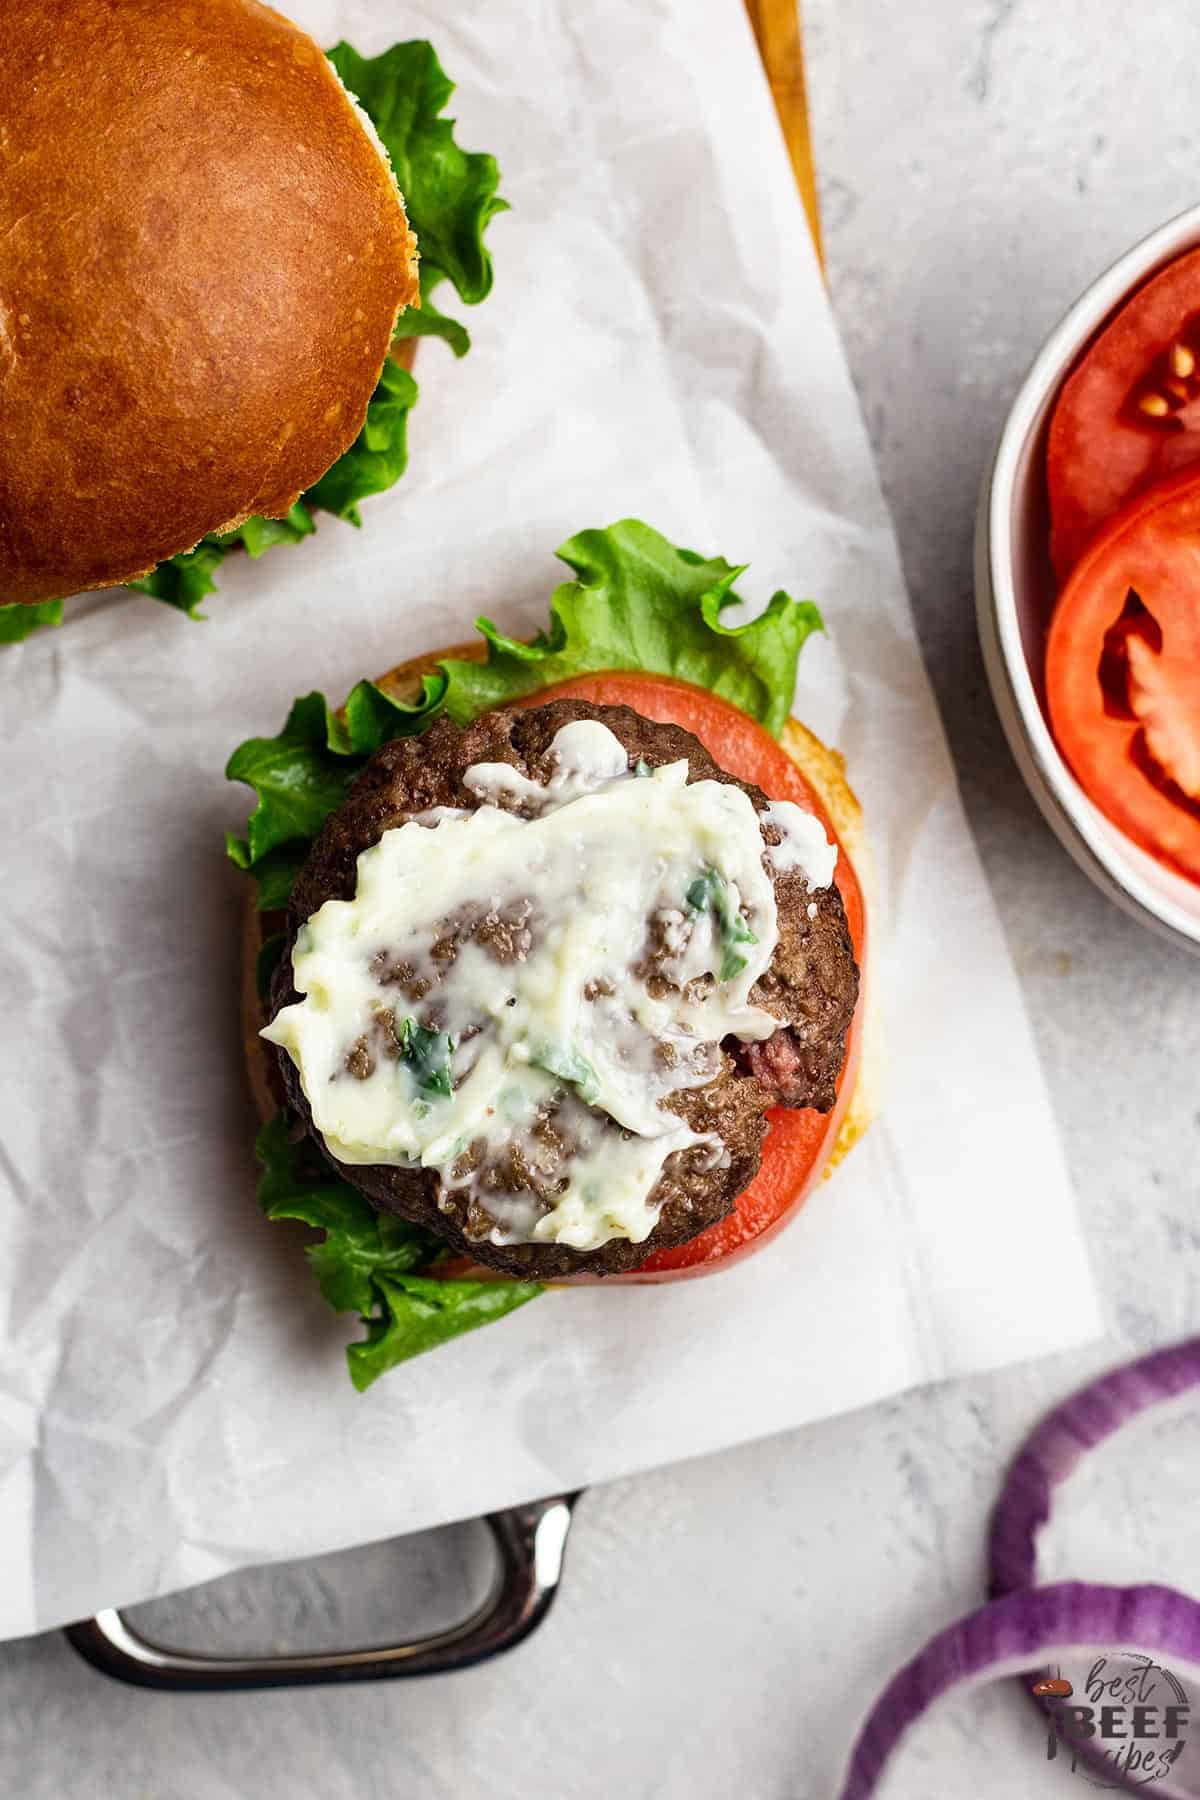 An open-face air fryer burger topped with garlic butter spread and tomatoes to the side in a white bowl